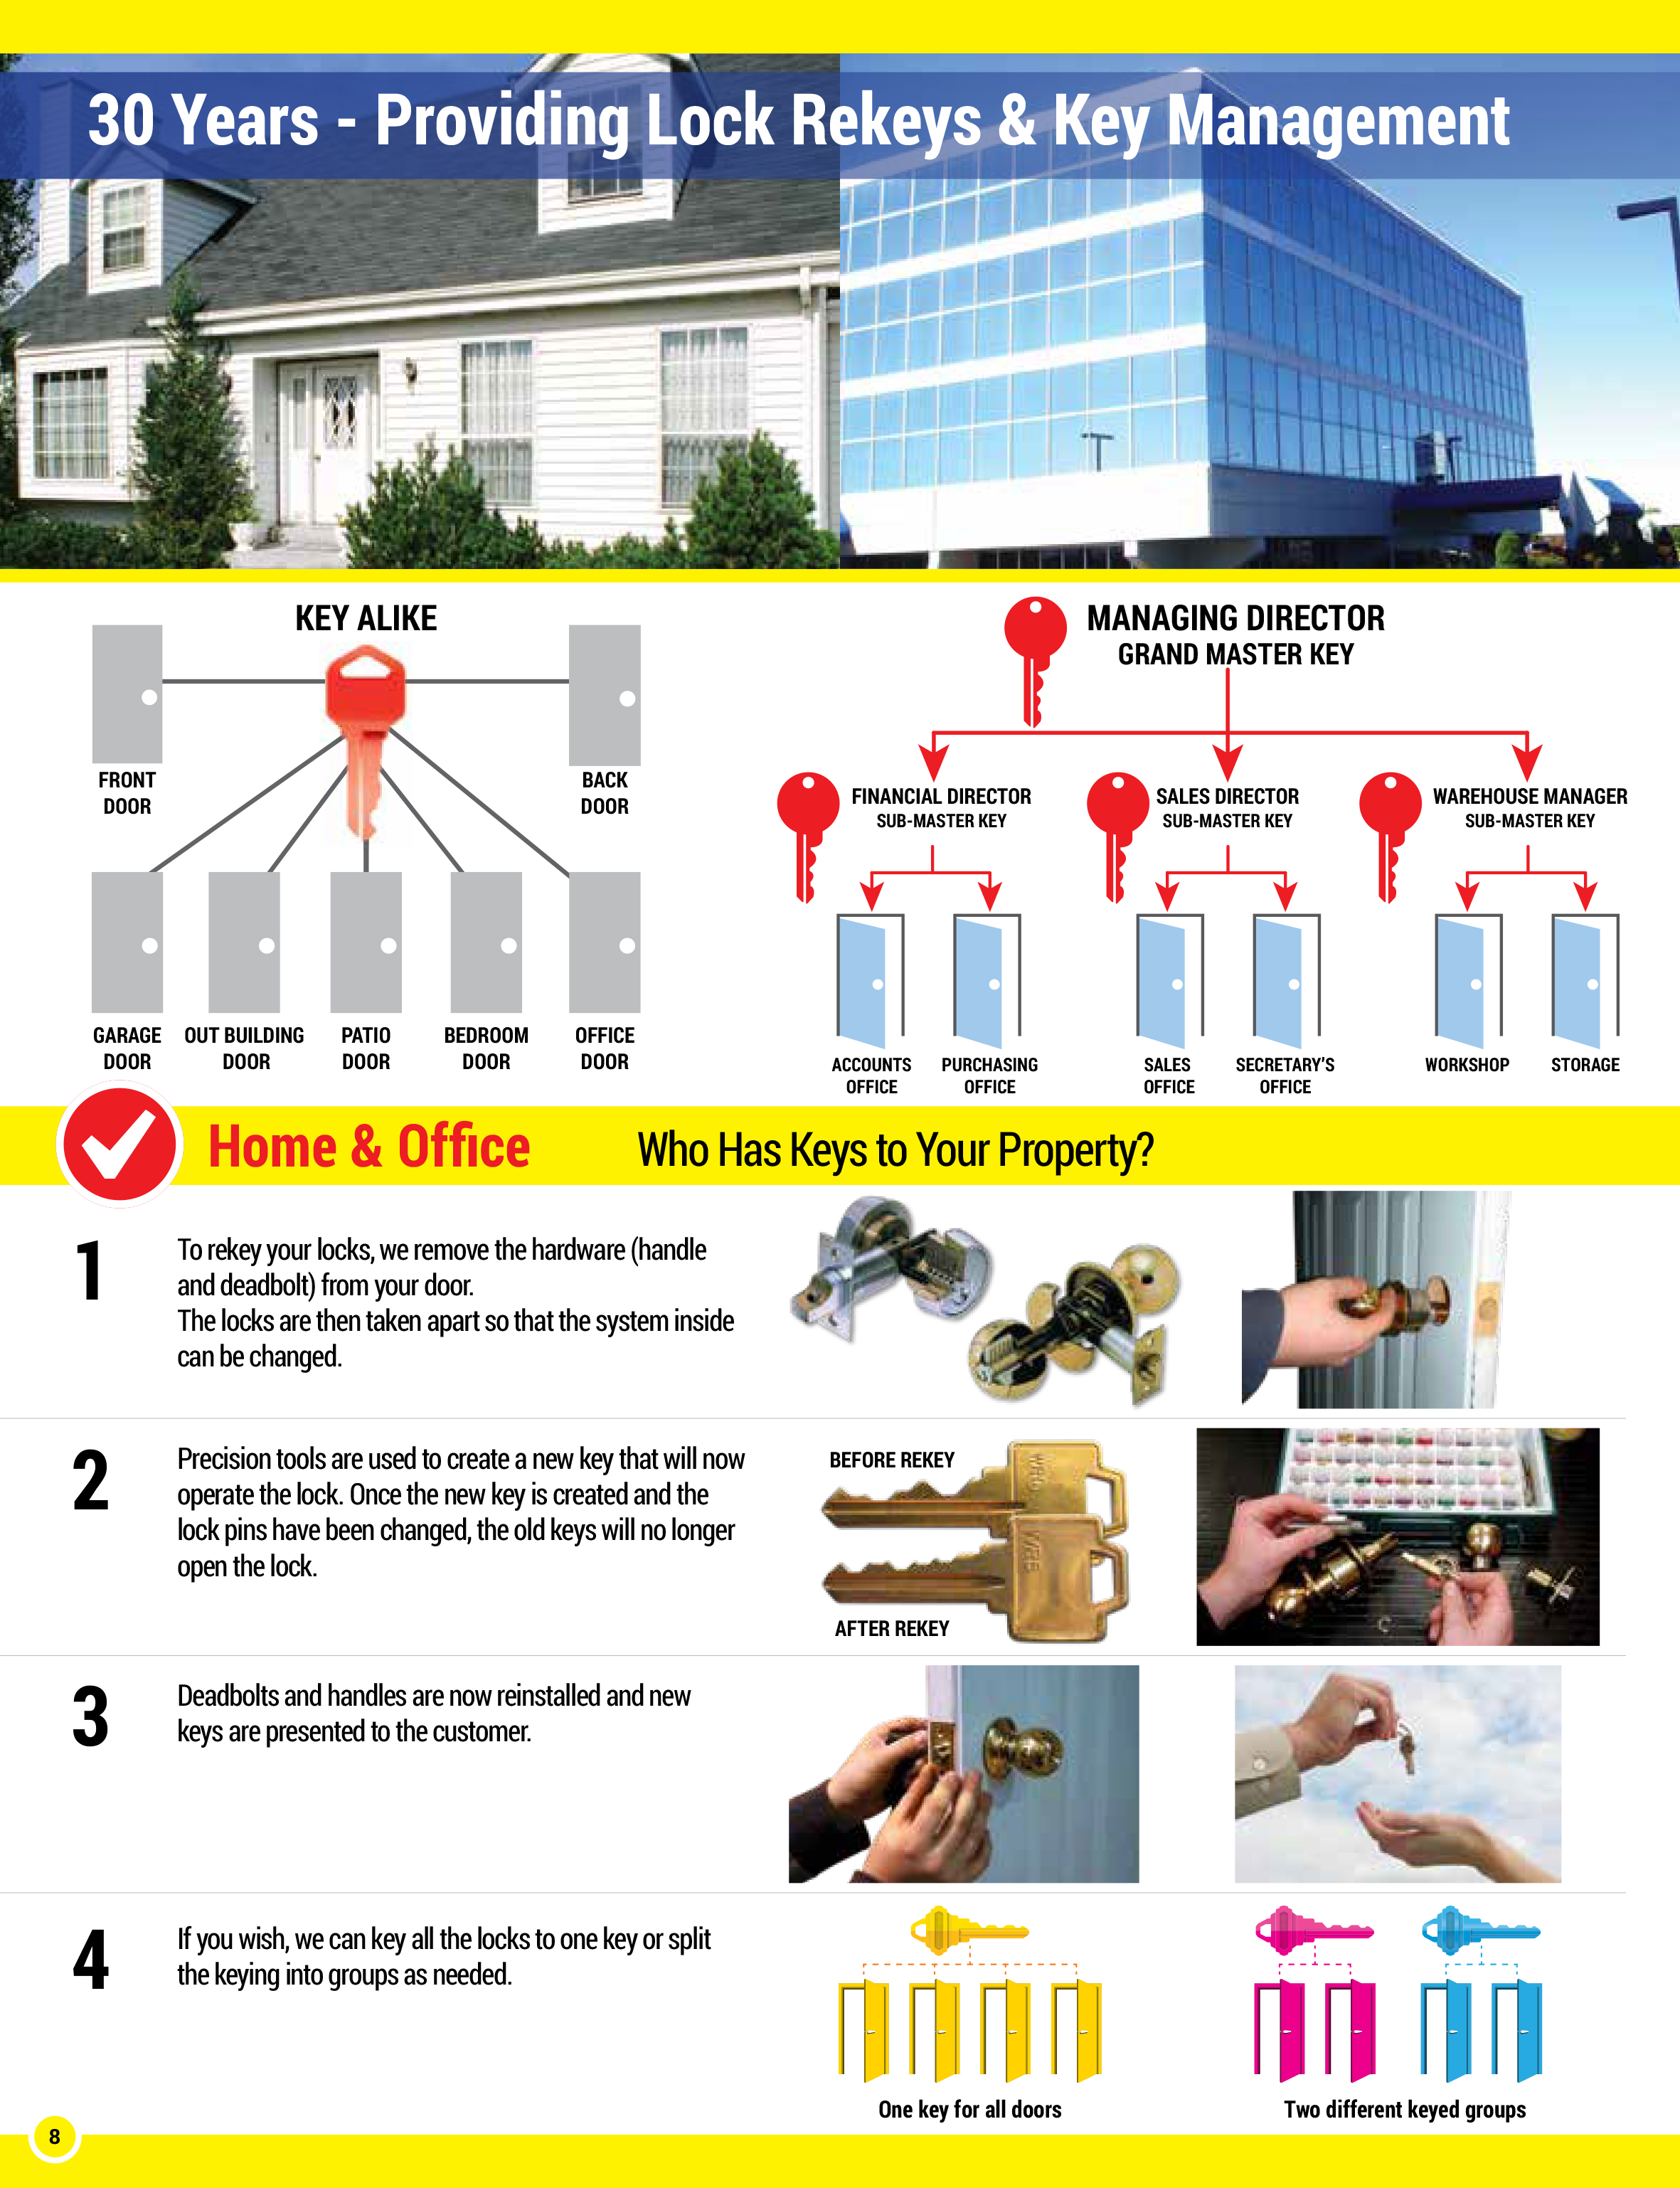 Door Surgeon can rekey door hardware reinstall and provide new keys for all doors, all while onsite.